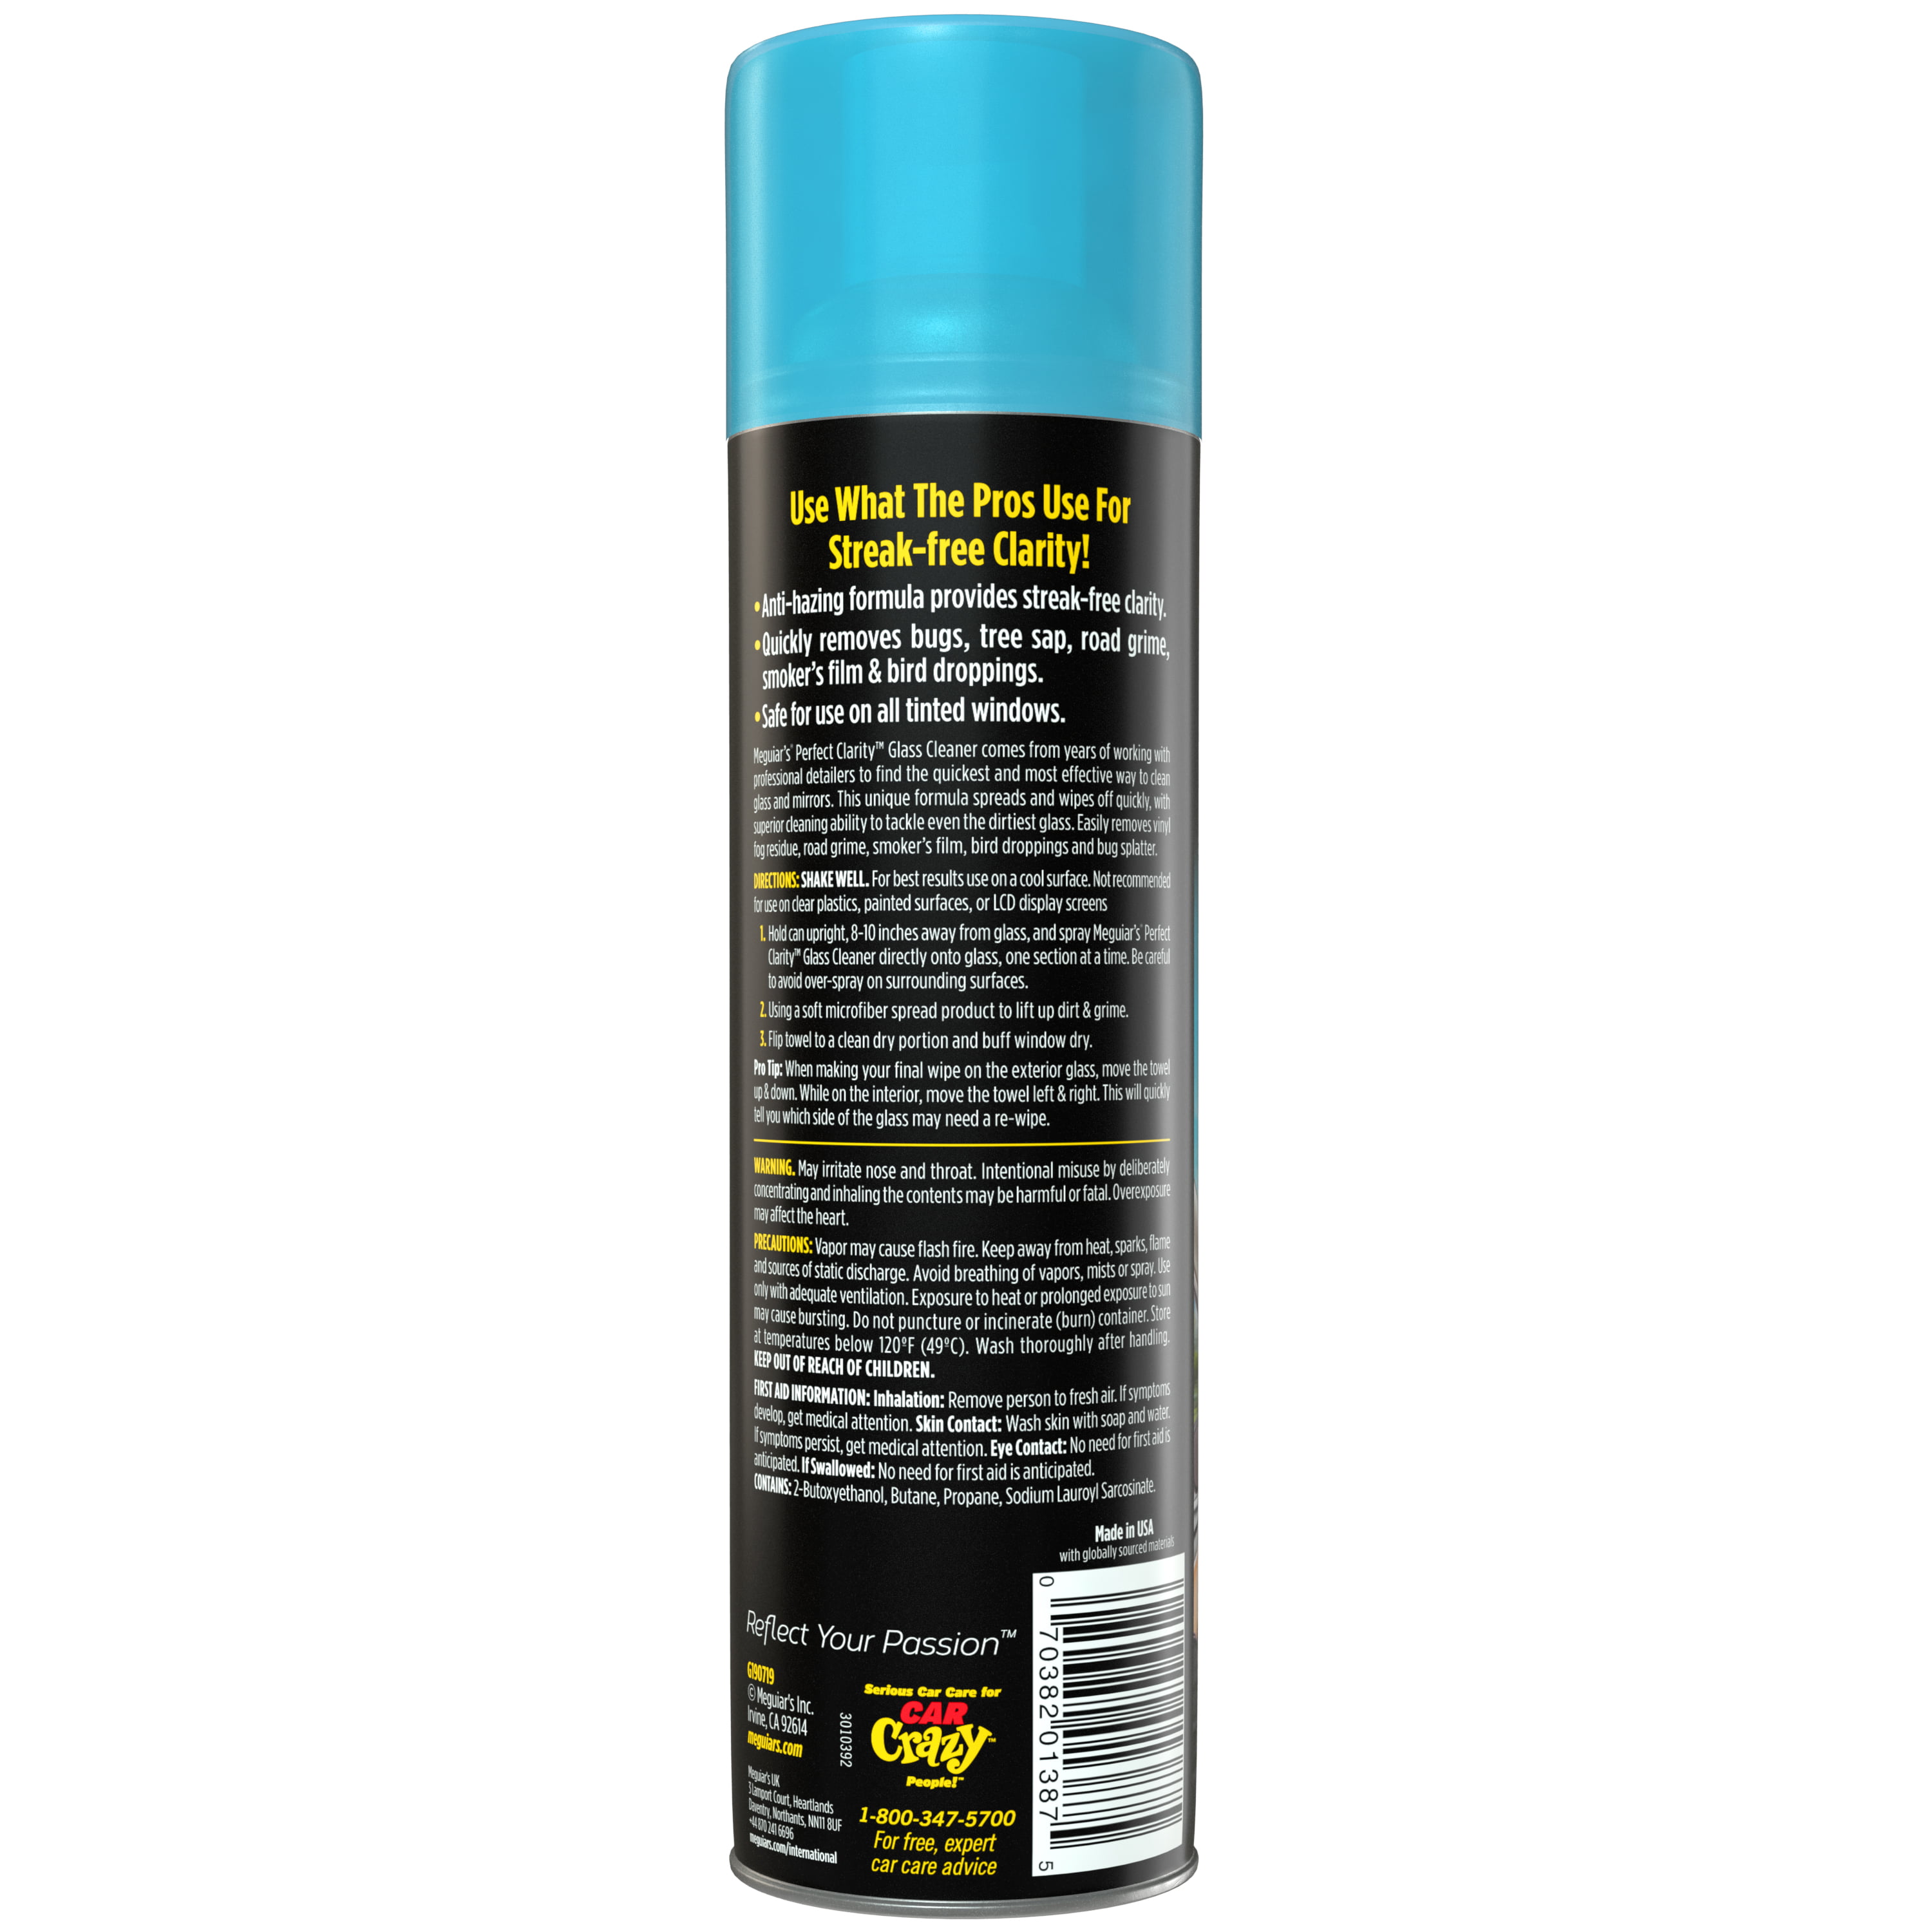 Slim's Detailing - Meguiar's Perfect Clarity Glass Cleaner is